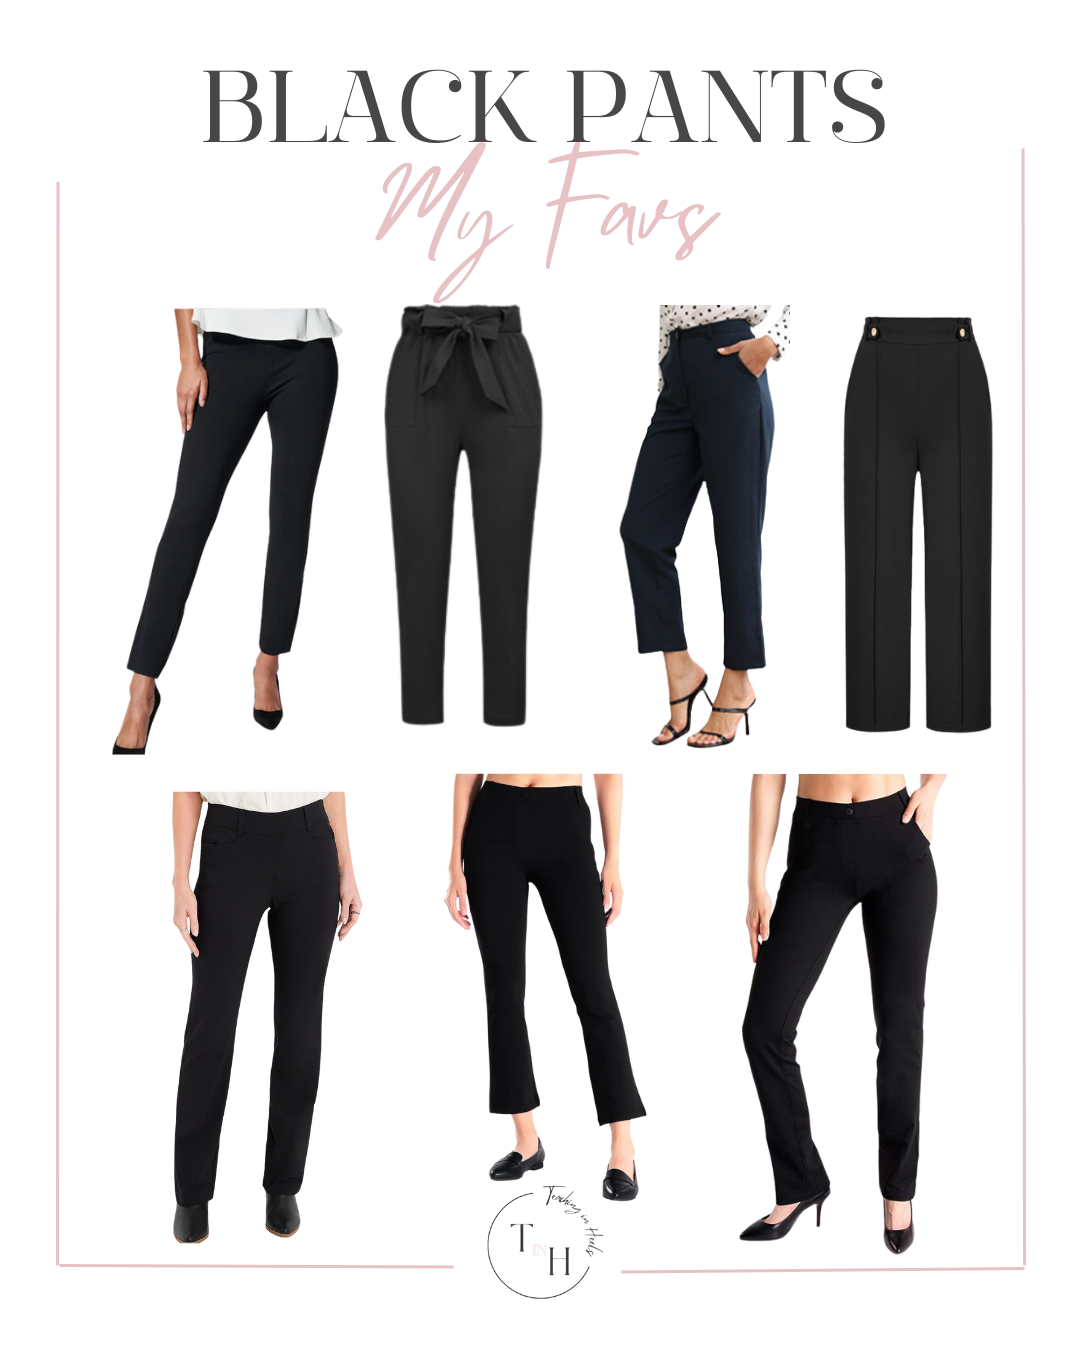 Teacher Approved Black Pants 

#black #pants #teacher #style #fashion #looks #cropped #straight #flair 